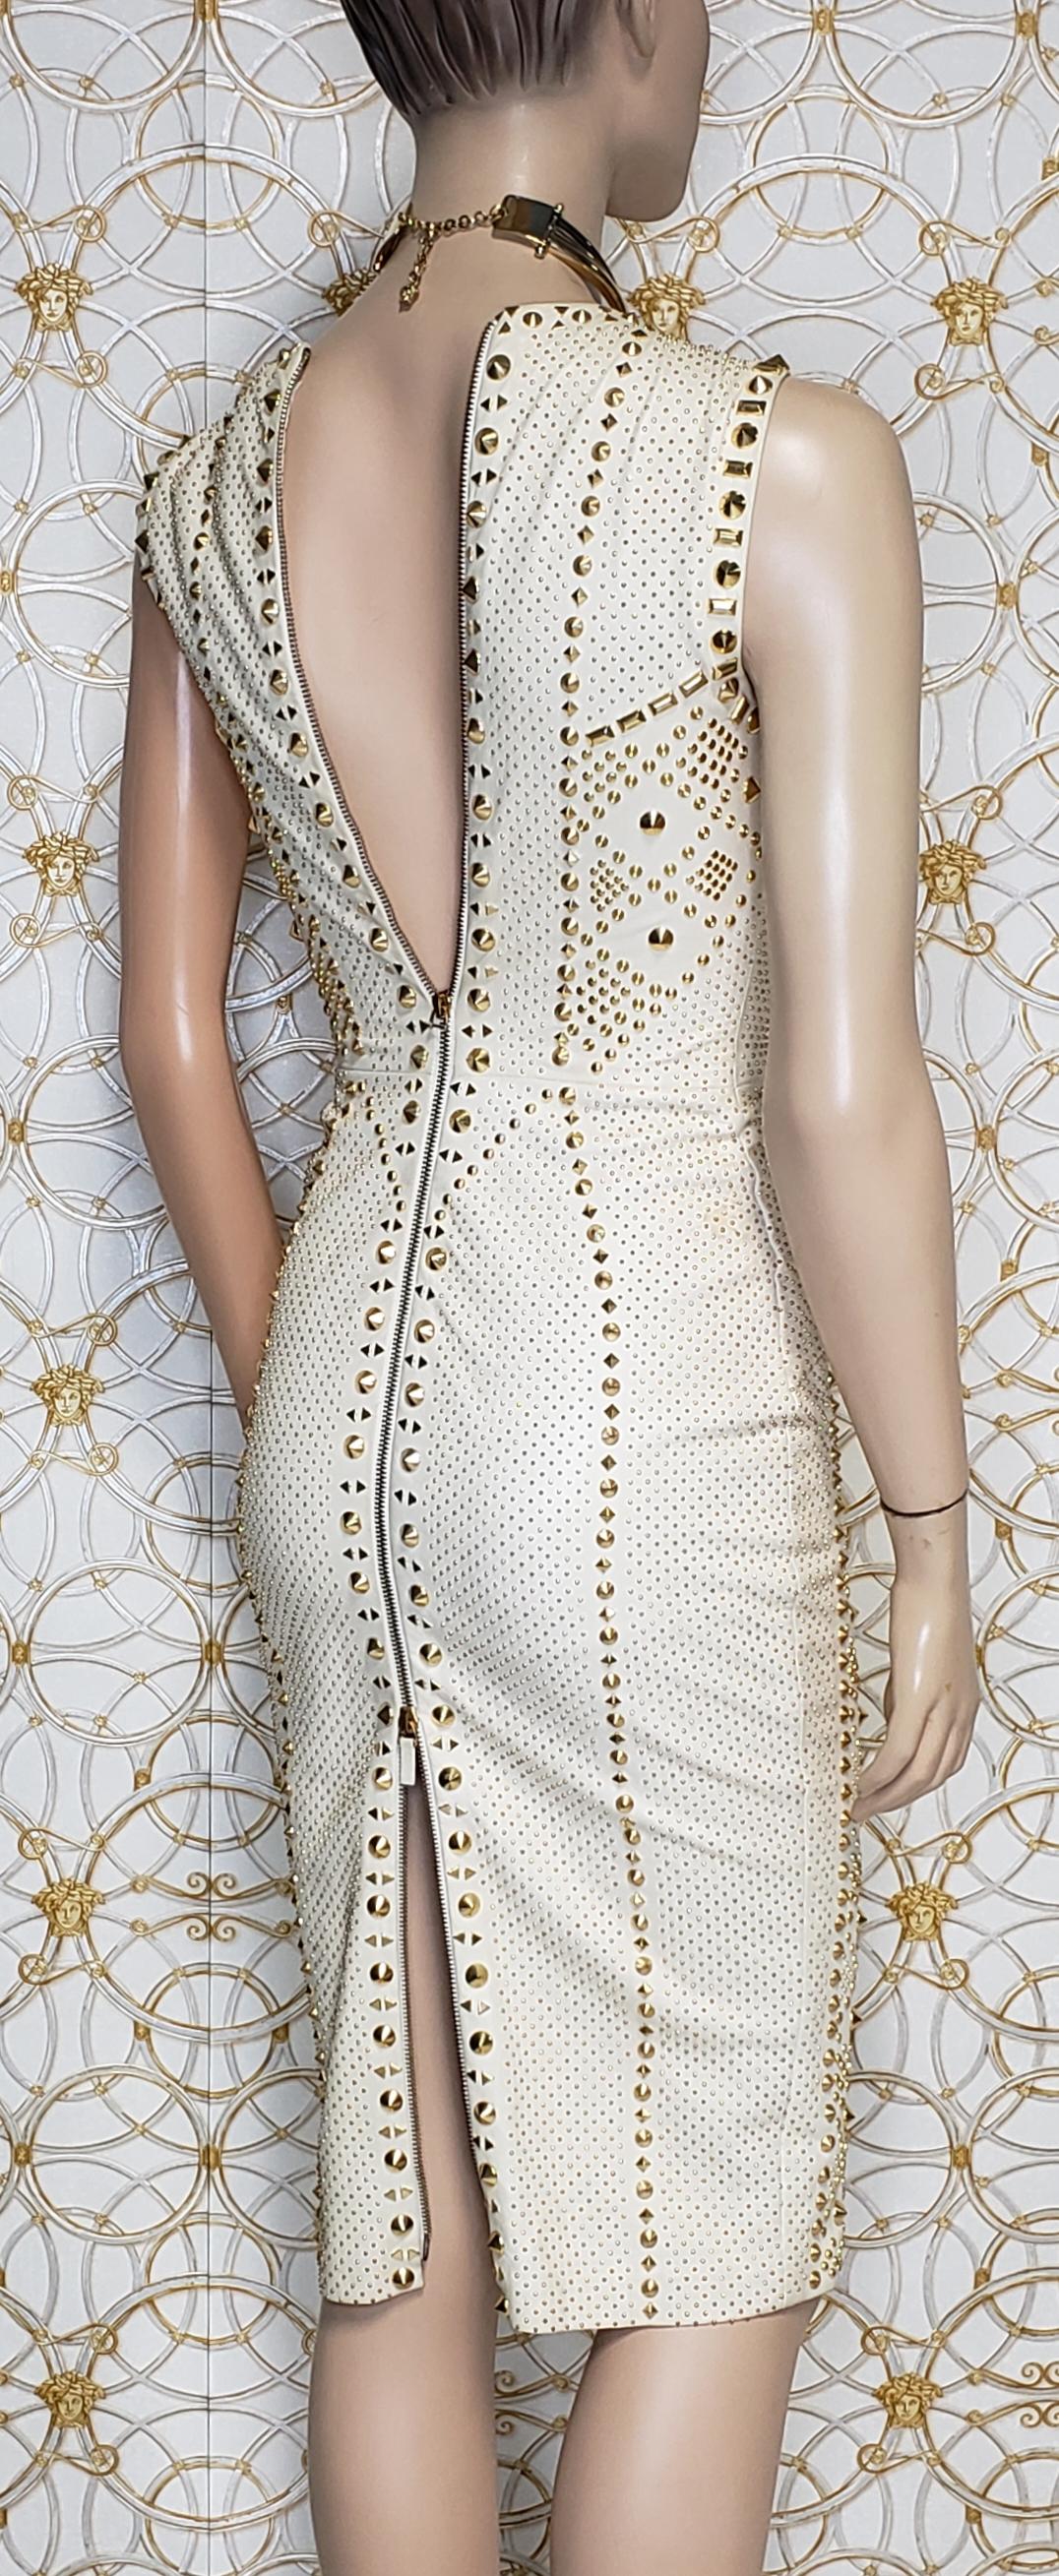 White S/S 2012 look #27 VERSACE WHITE STUDDED EMBELLISHED LEATHER DRESS 38 - 2 For Sale